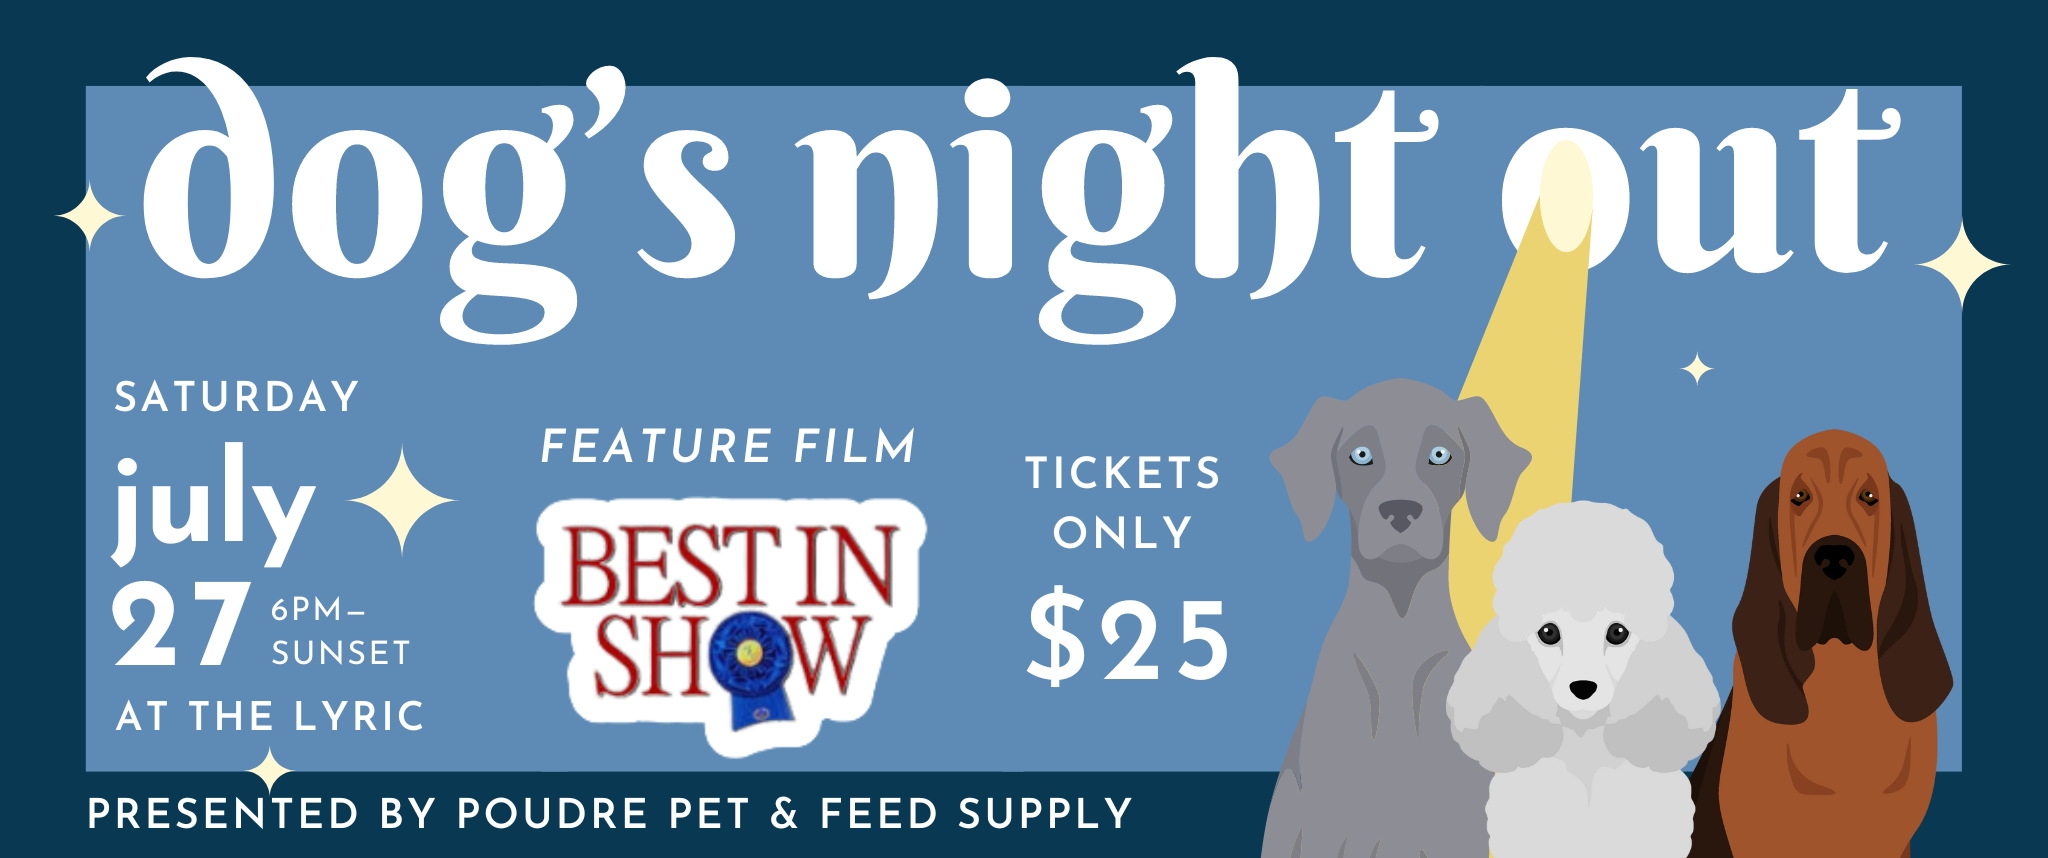 Dog's Night Out Event Poster